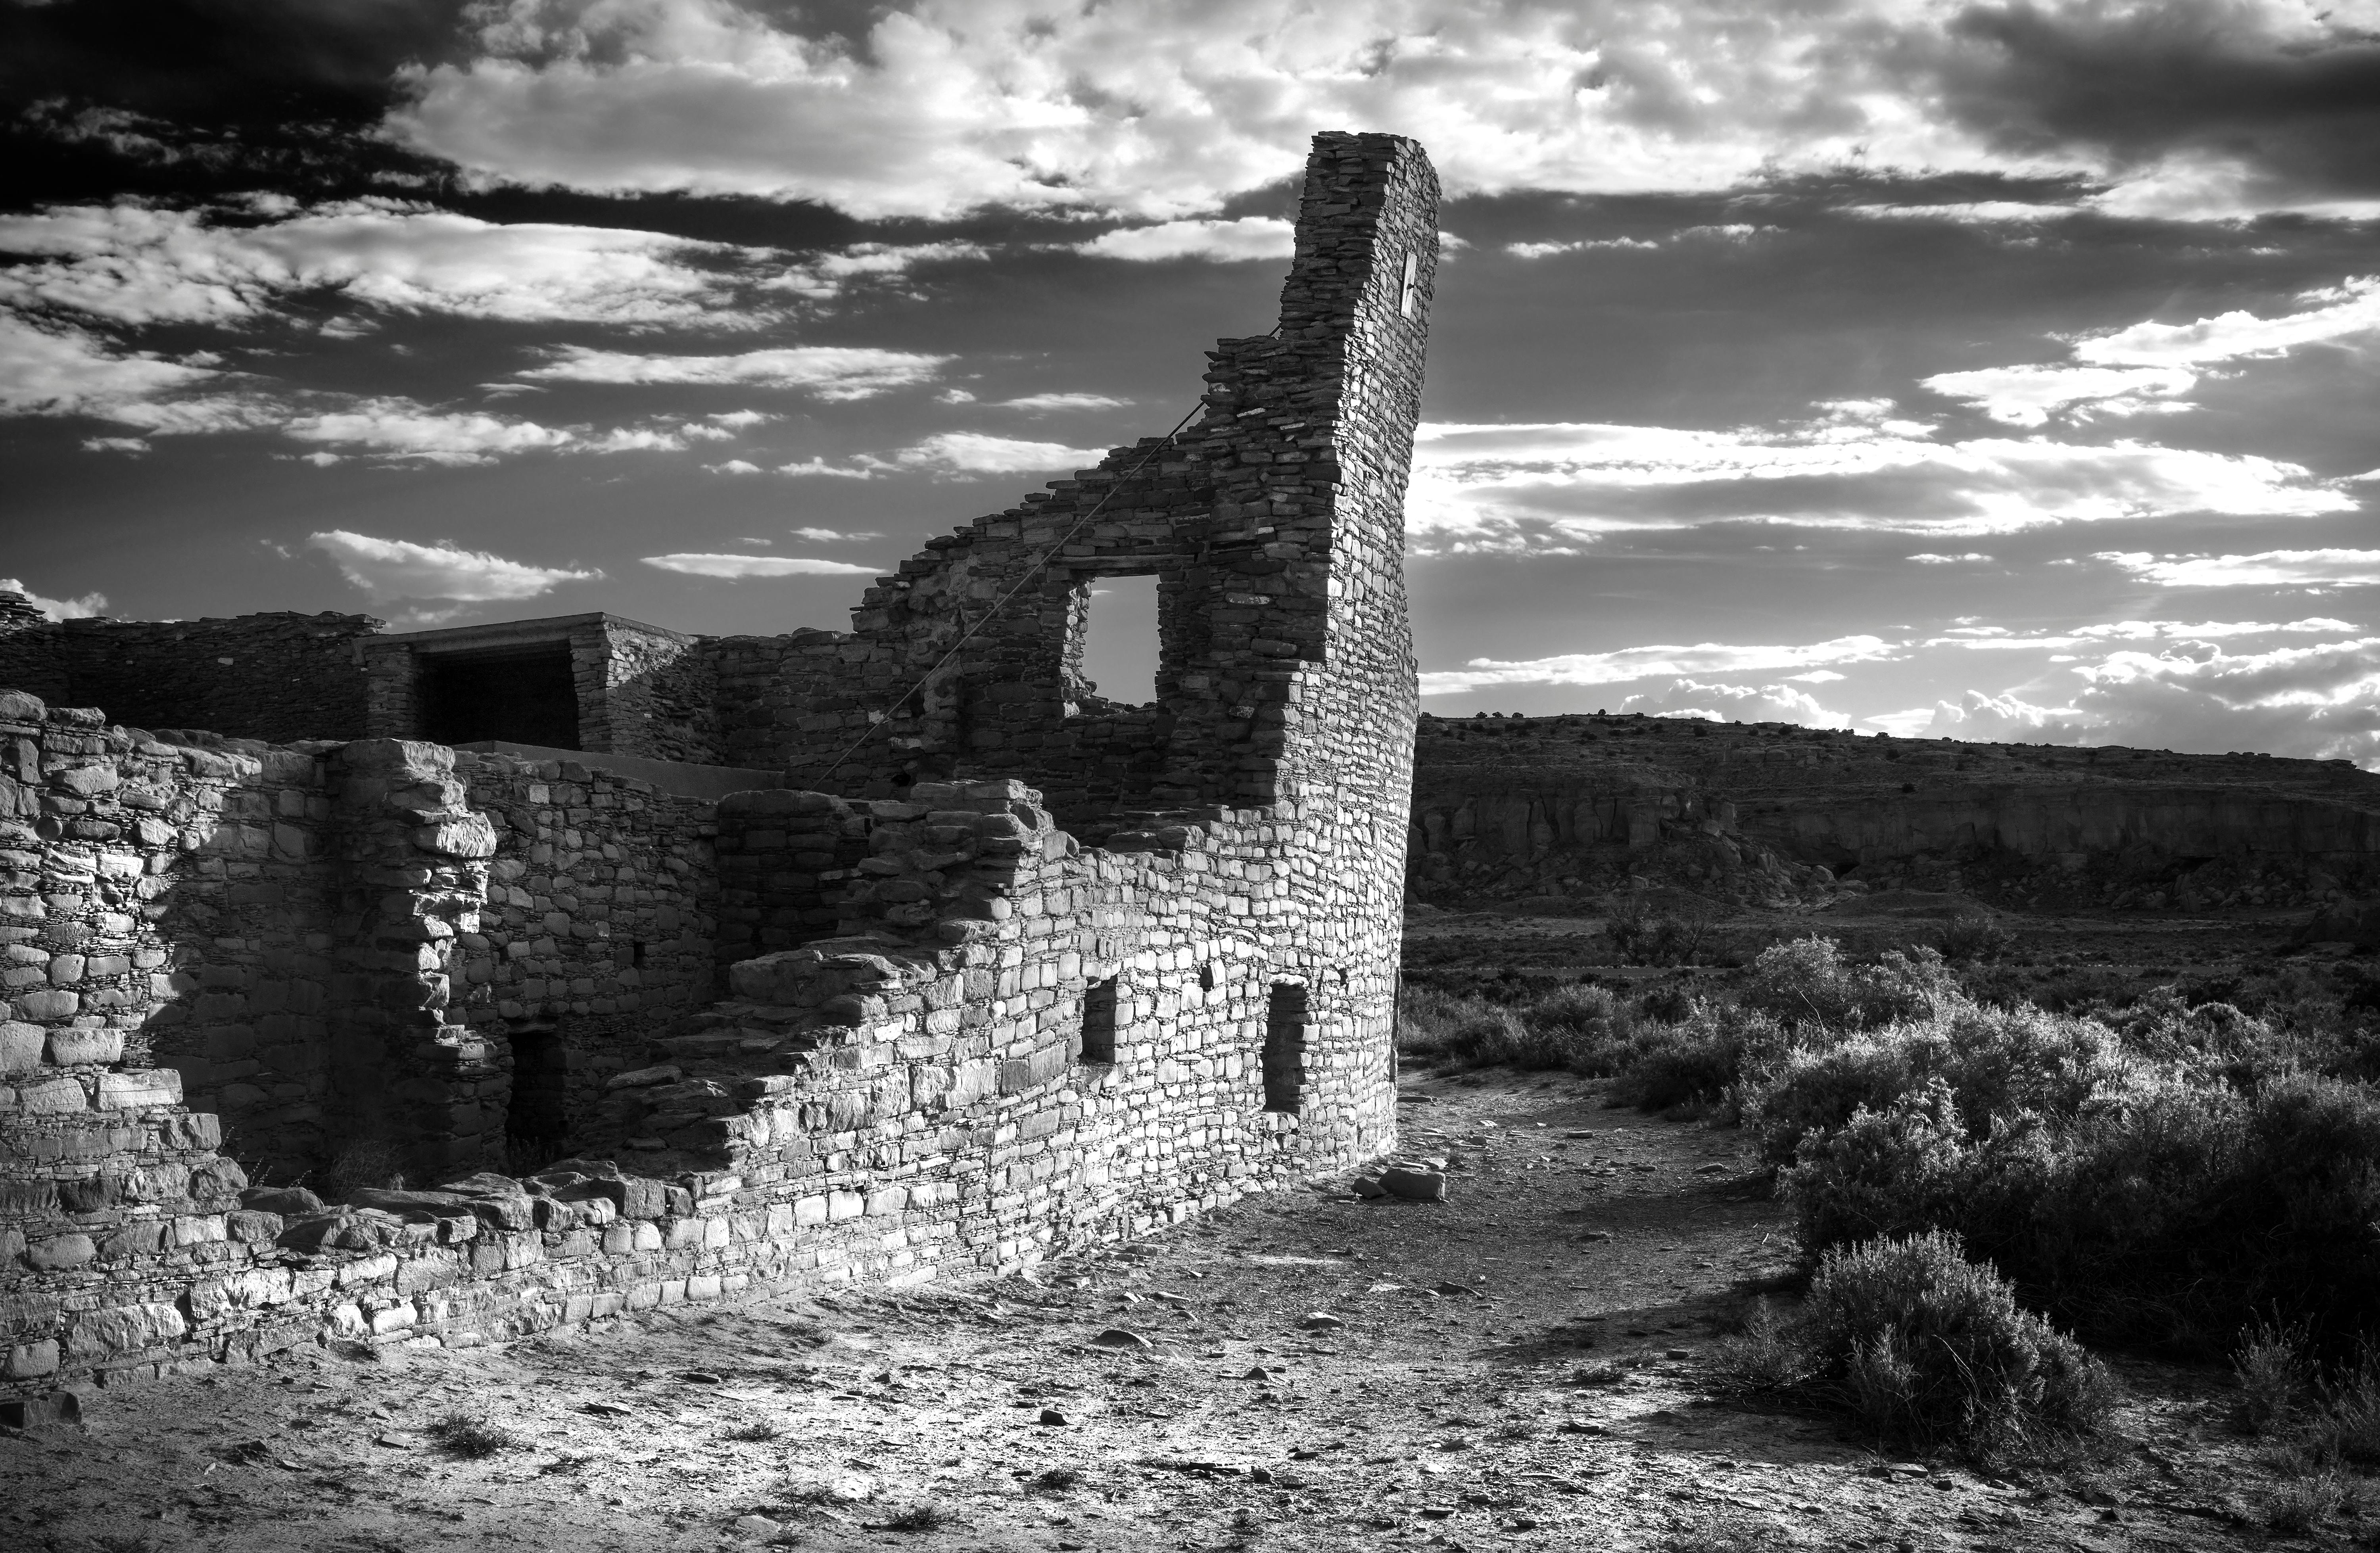 Lawrence Fodor. Chaco Canyon, 2015.05.31.12, 2015, archival pigment ink print. edition of 3. Image Size: 20 x 32". Edition of 3.